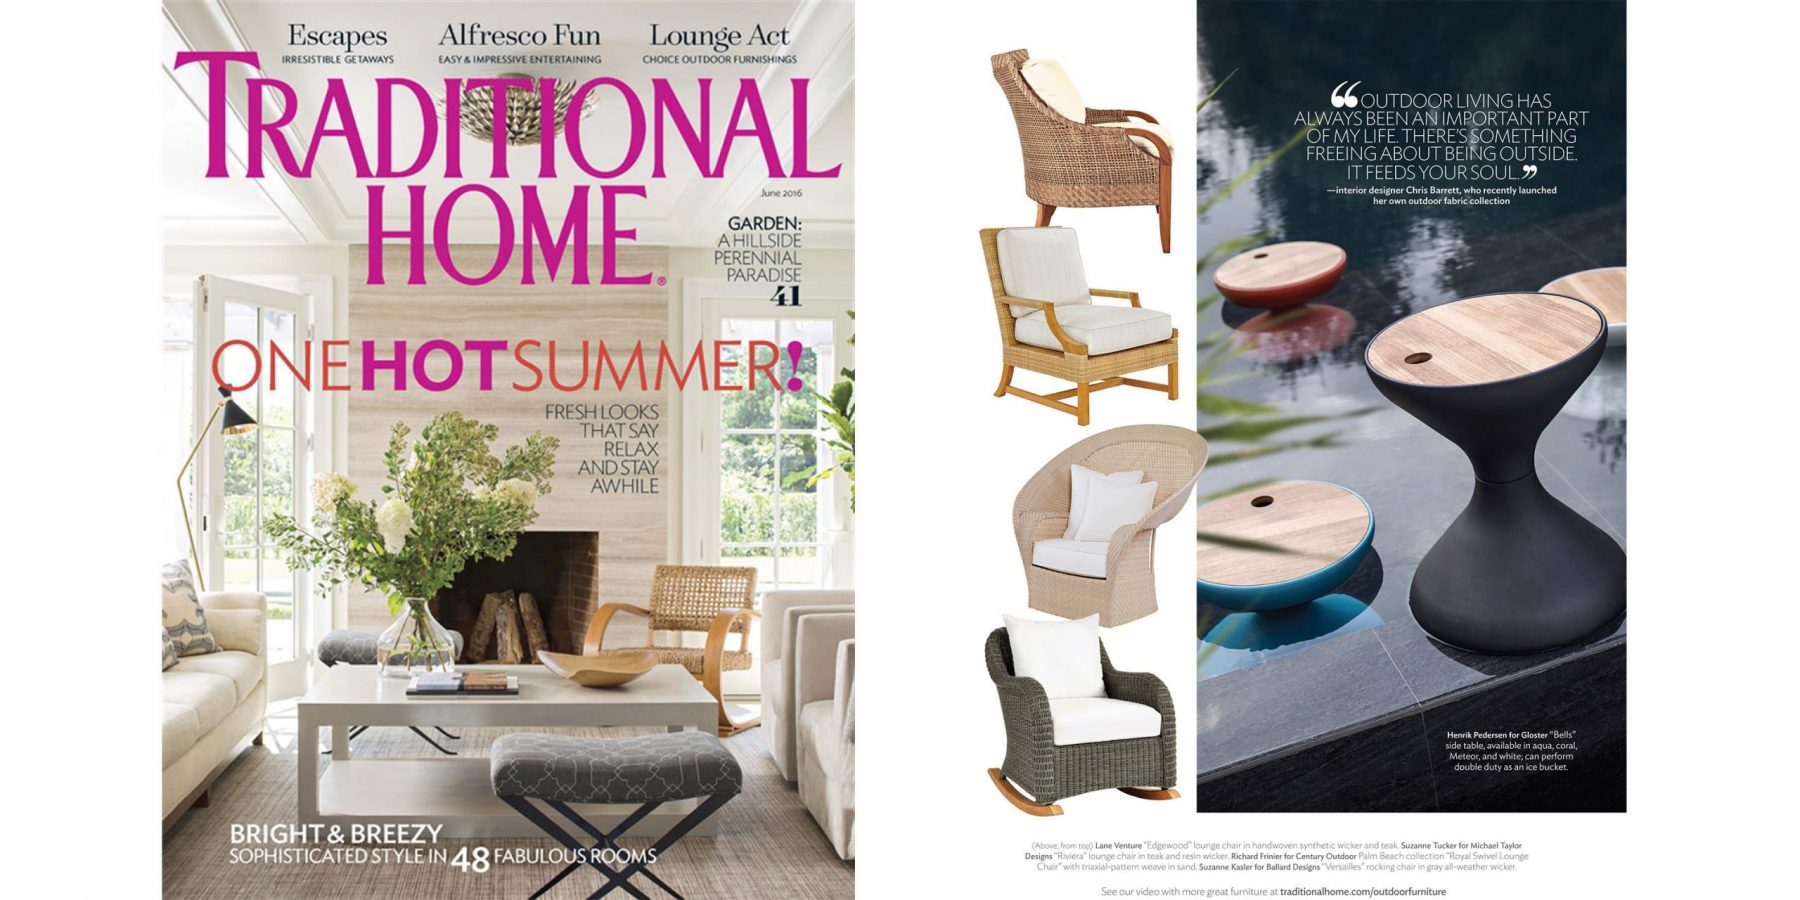 TRADITIONAL HOME – JUNE 2016